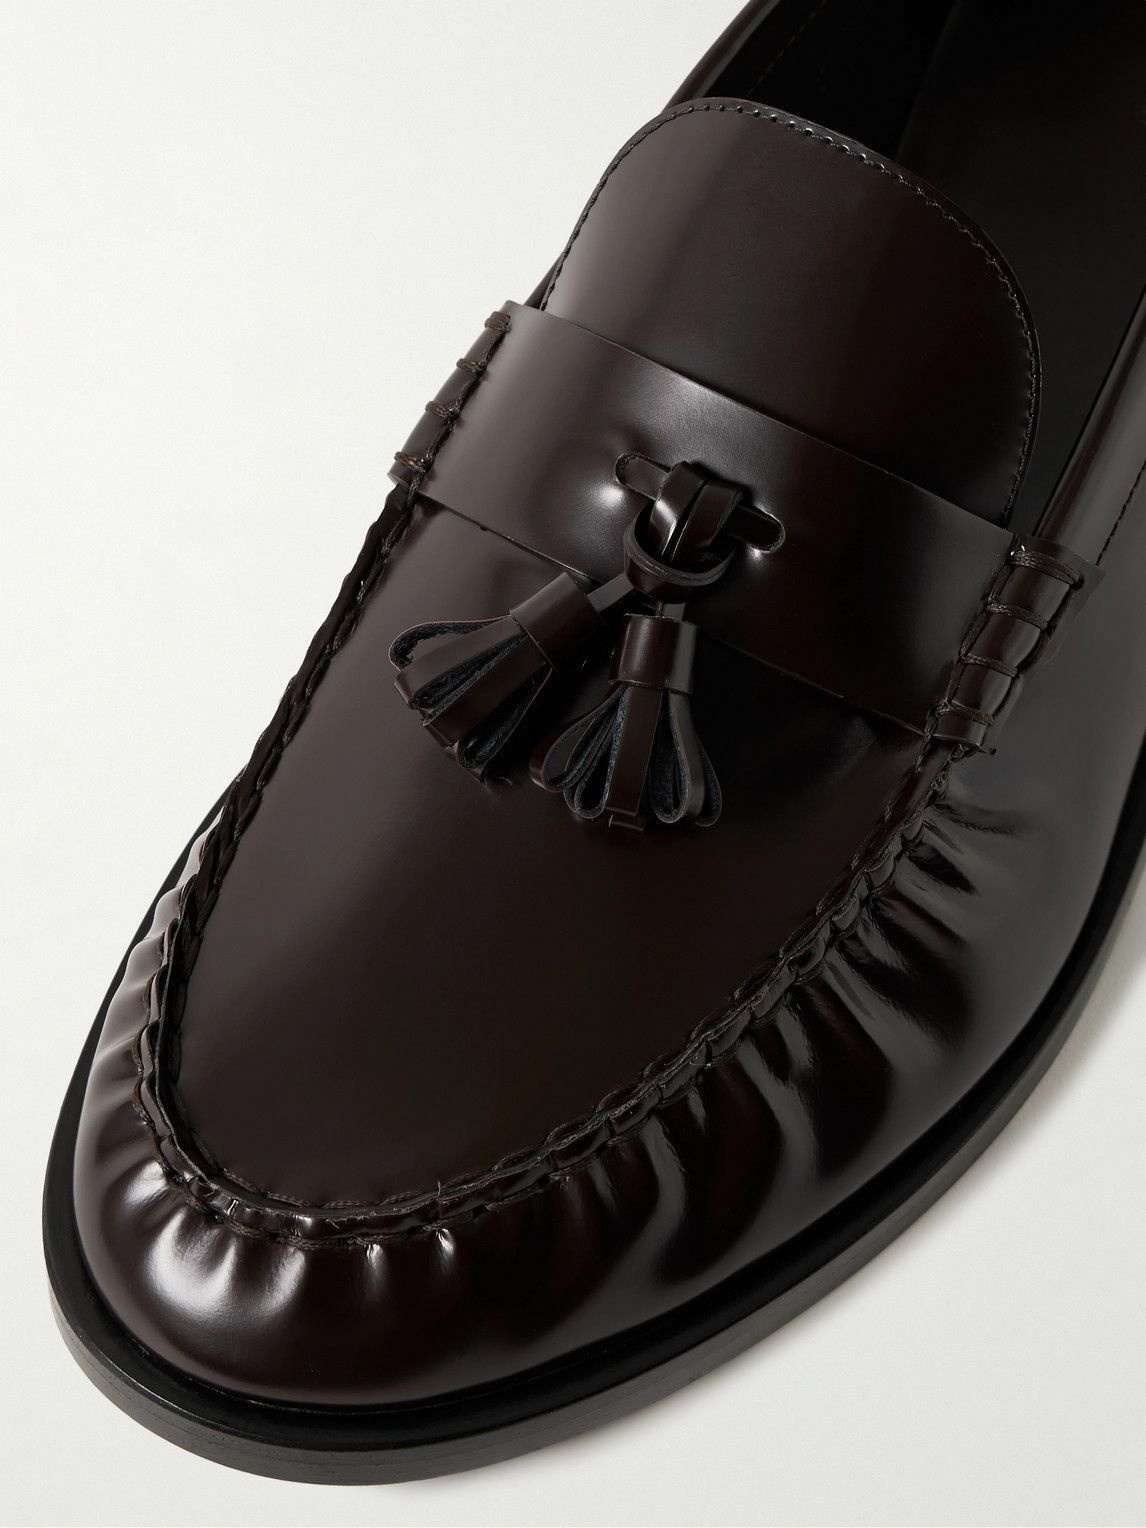 The Row - Tasselled Patent-Leather Loafers - Brown The Row